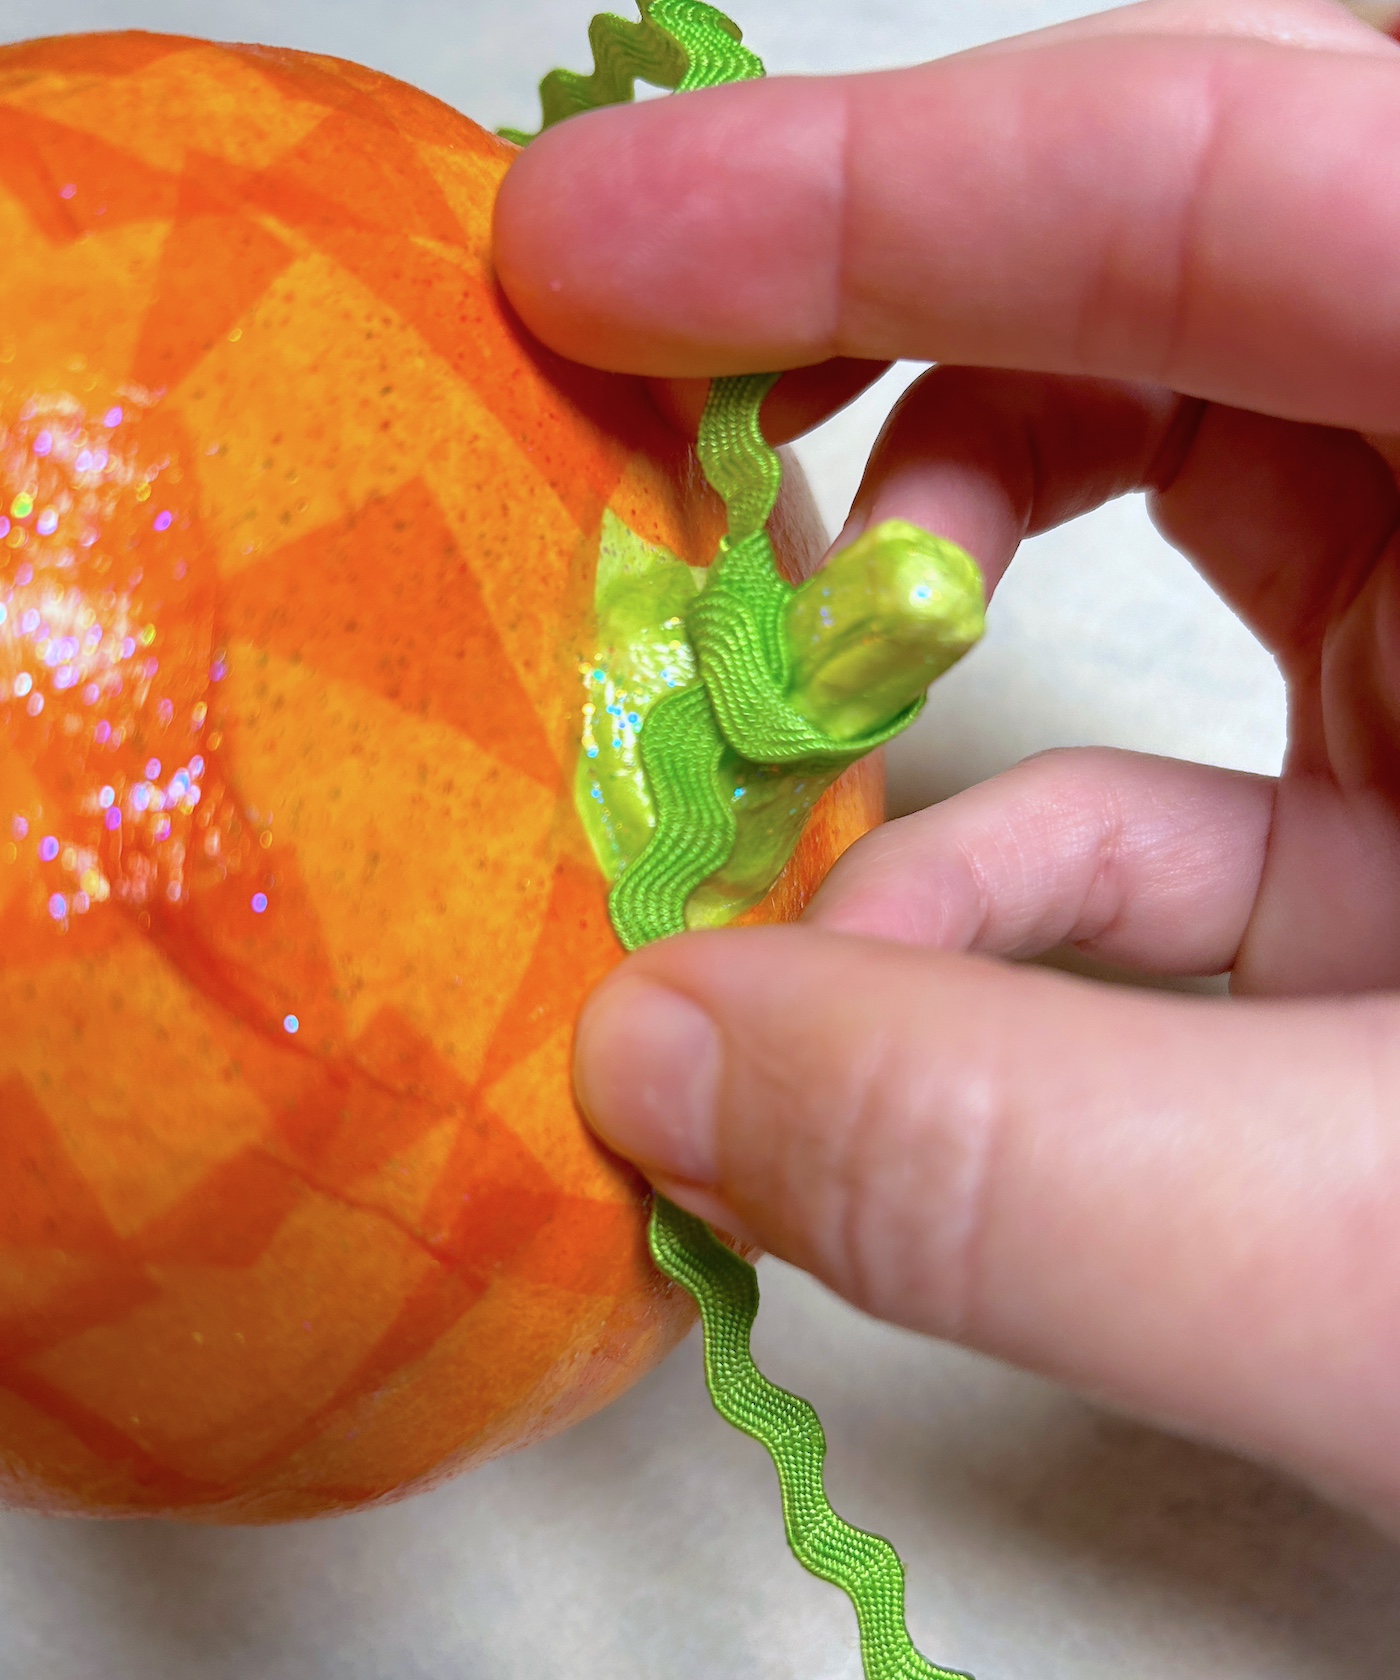 Tying green ric rac trim onto the tops of the pumpkins